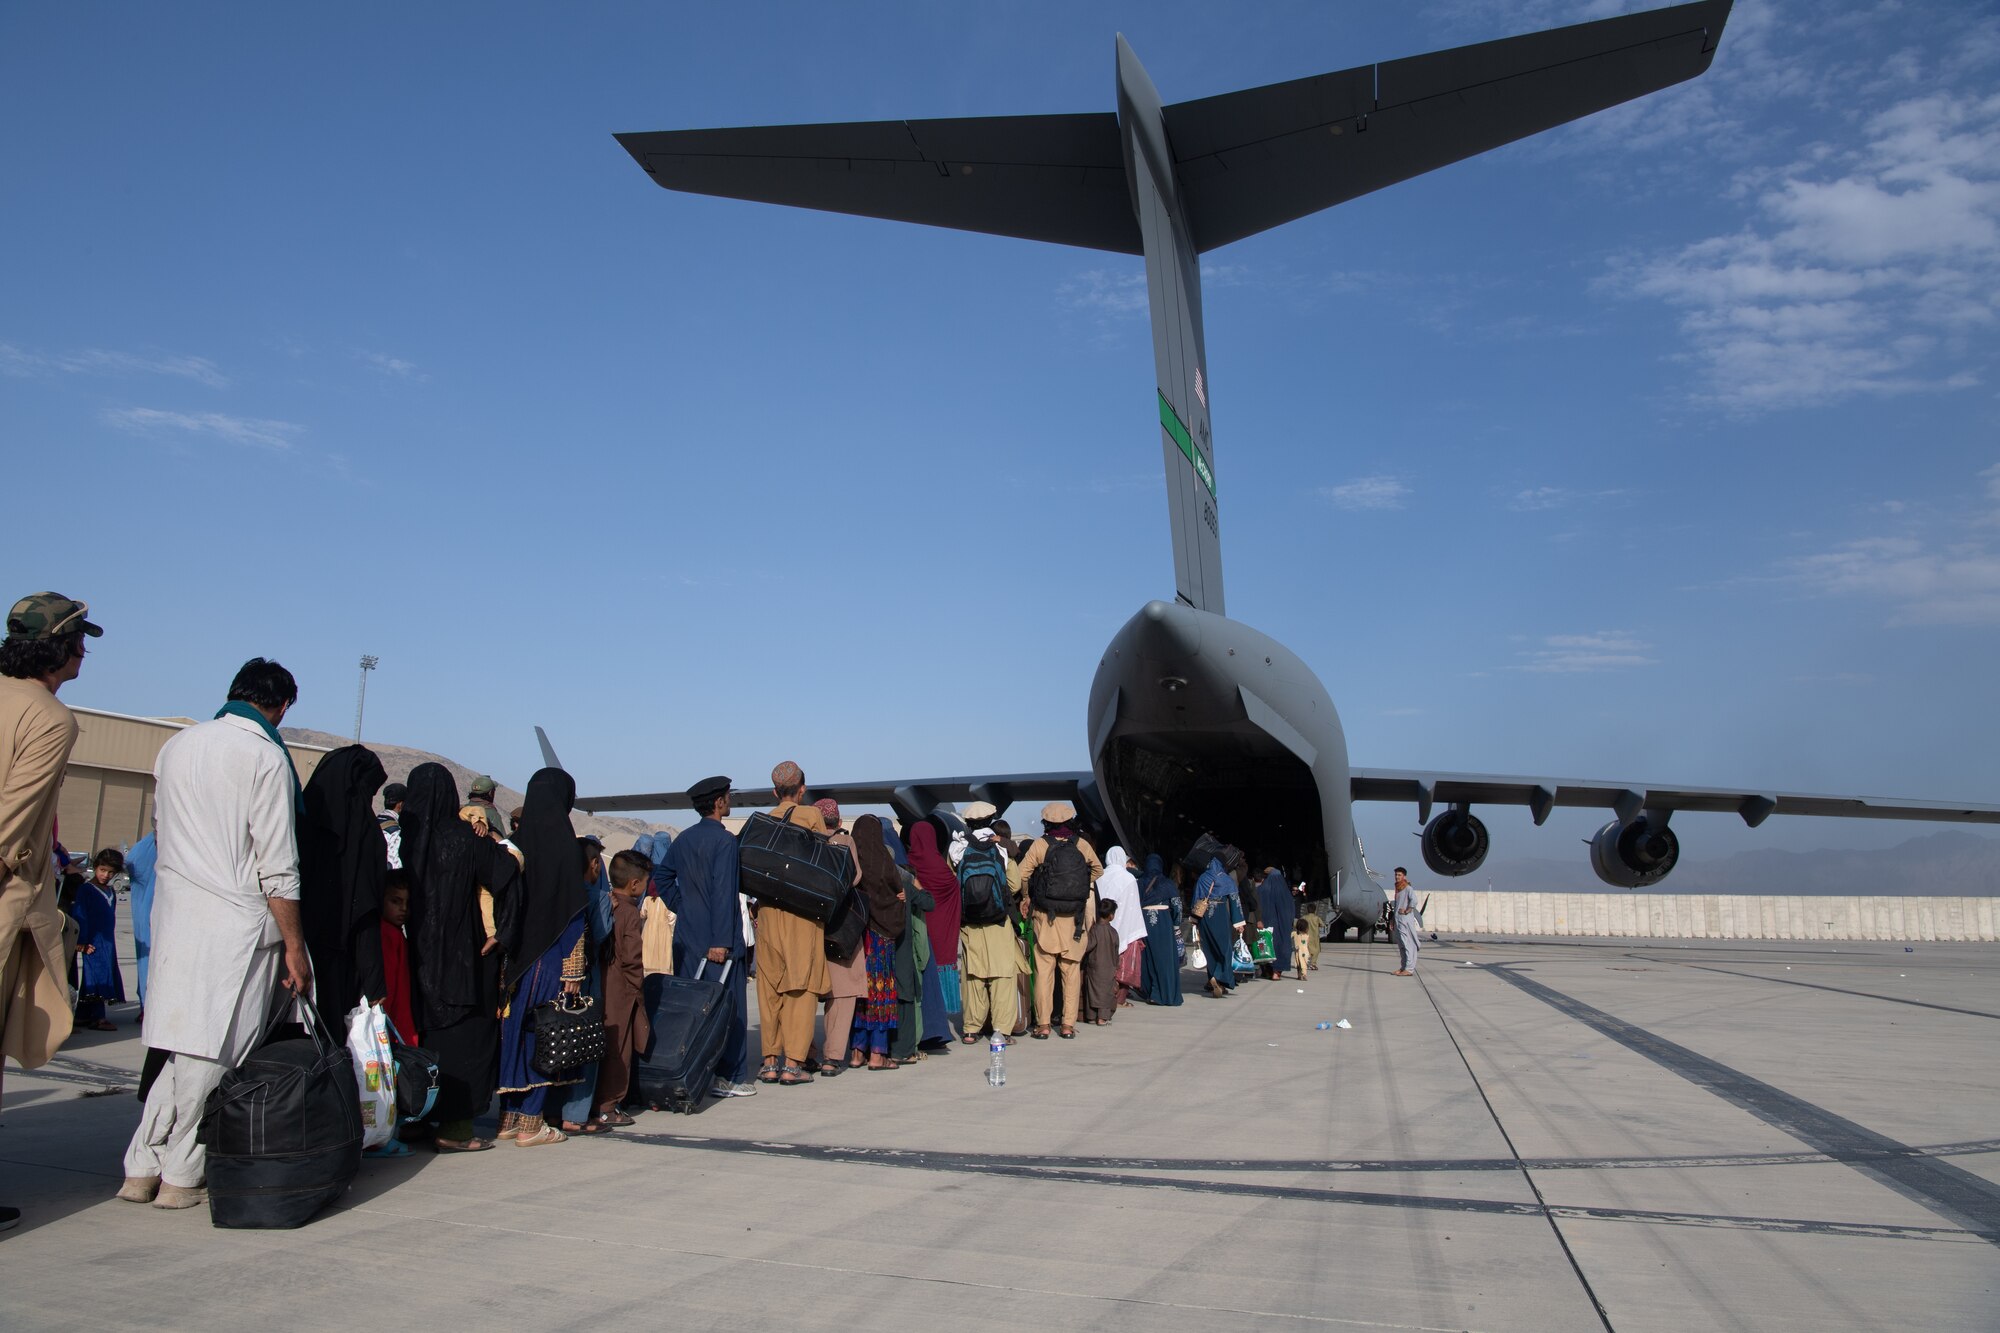 U.S. Air Force loadmasters and pilots assigned to the 816th Expeditionary Airlift Squadron, load passengers aboard a U.S. Air Force C-17 Globemaster III in support of the Afghanistan evacuation at Hamid Karzai International Airport (HKIA), Afghanistan, Aug. 24, 2021.